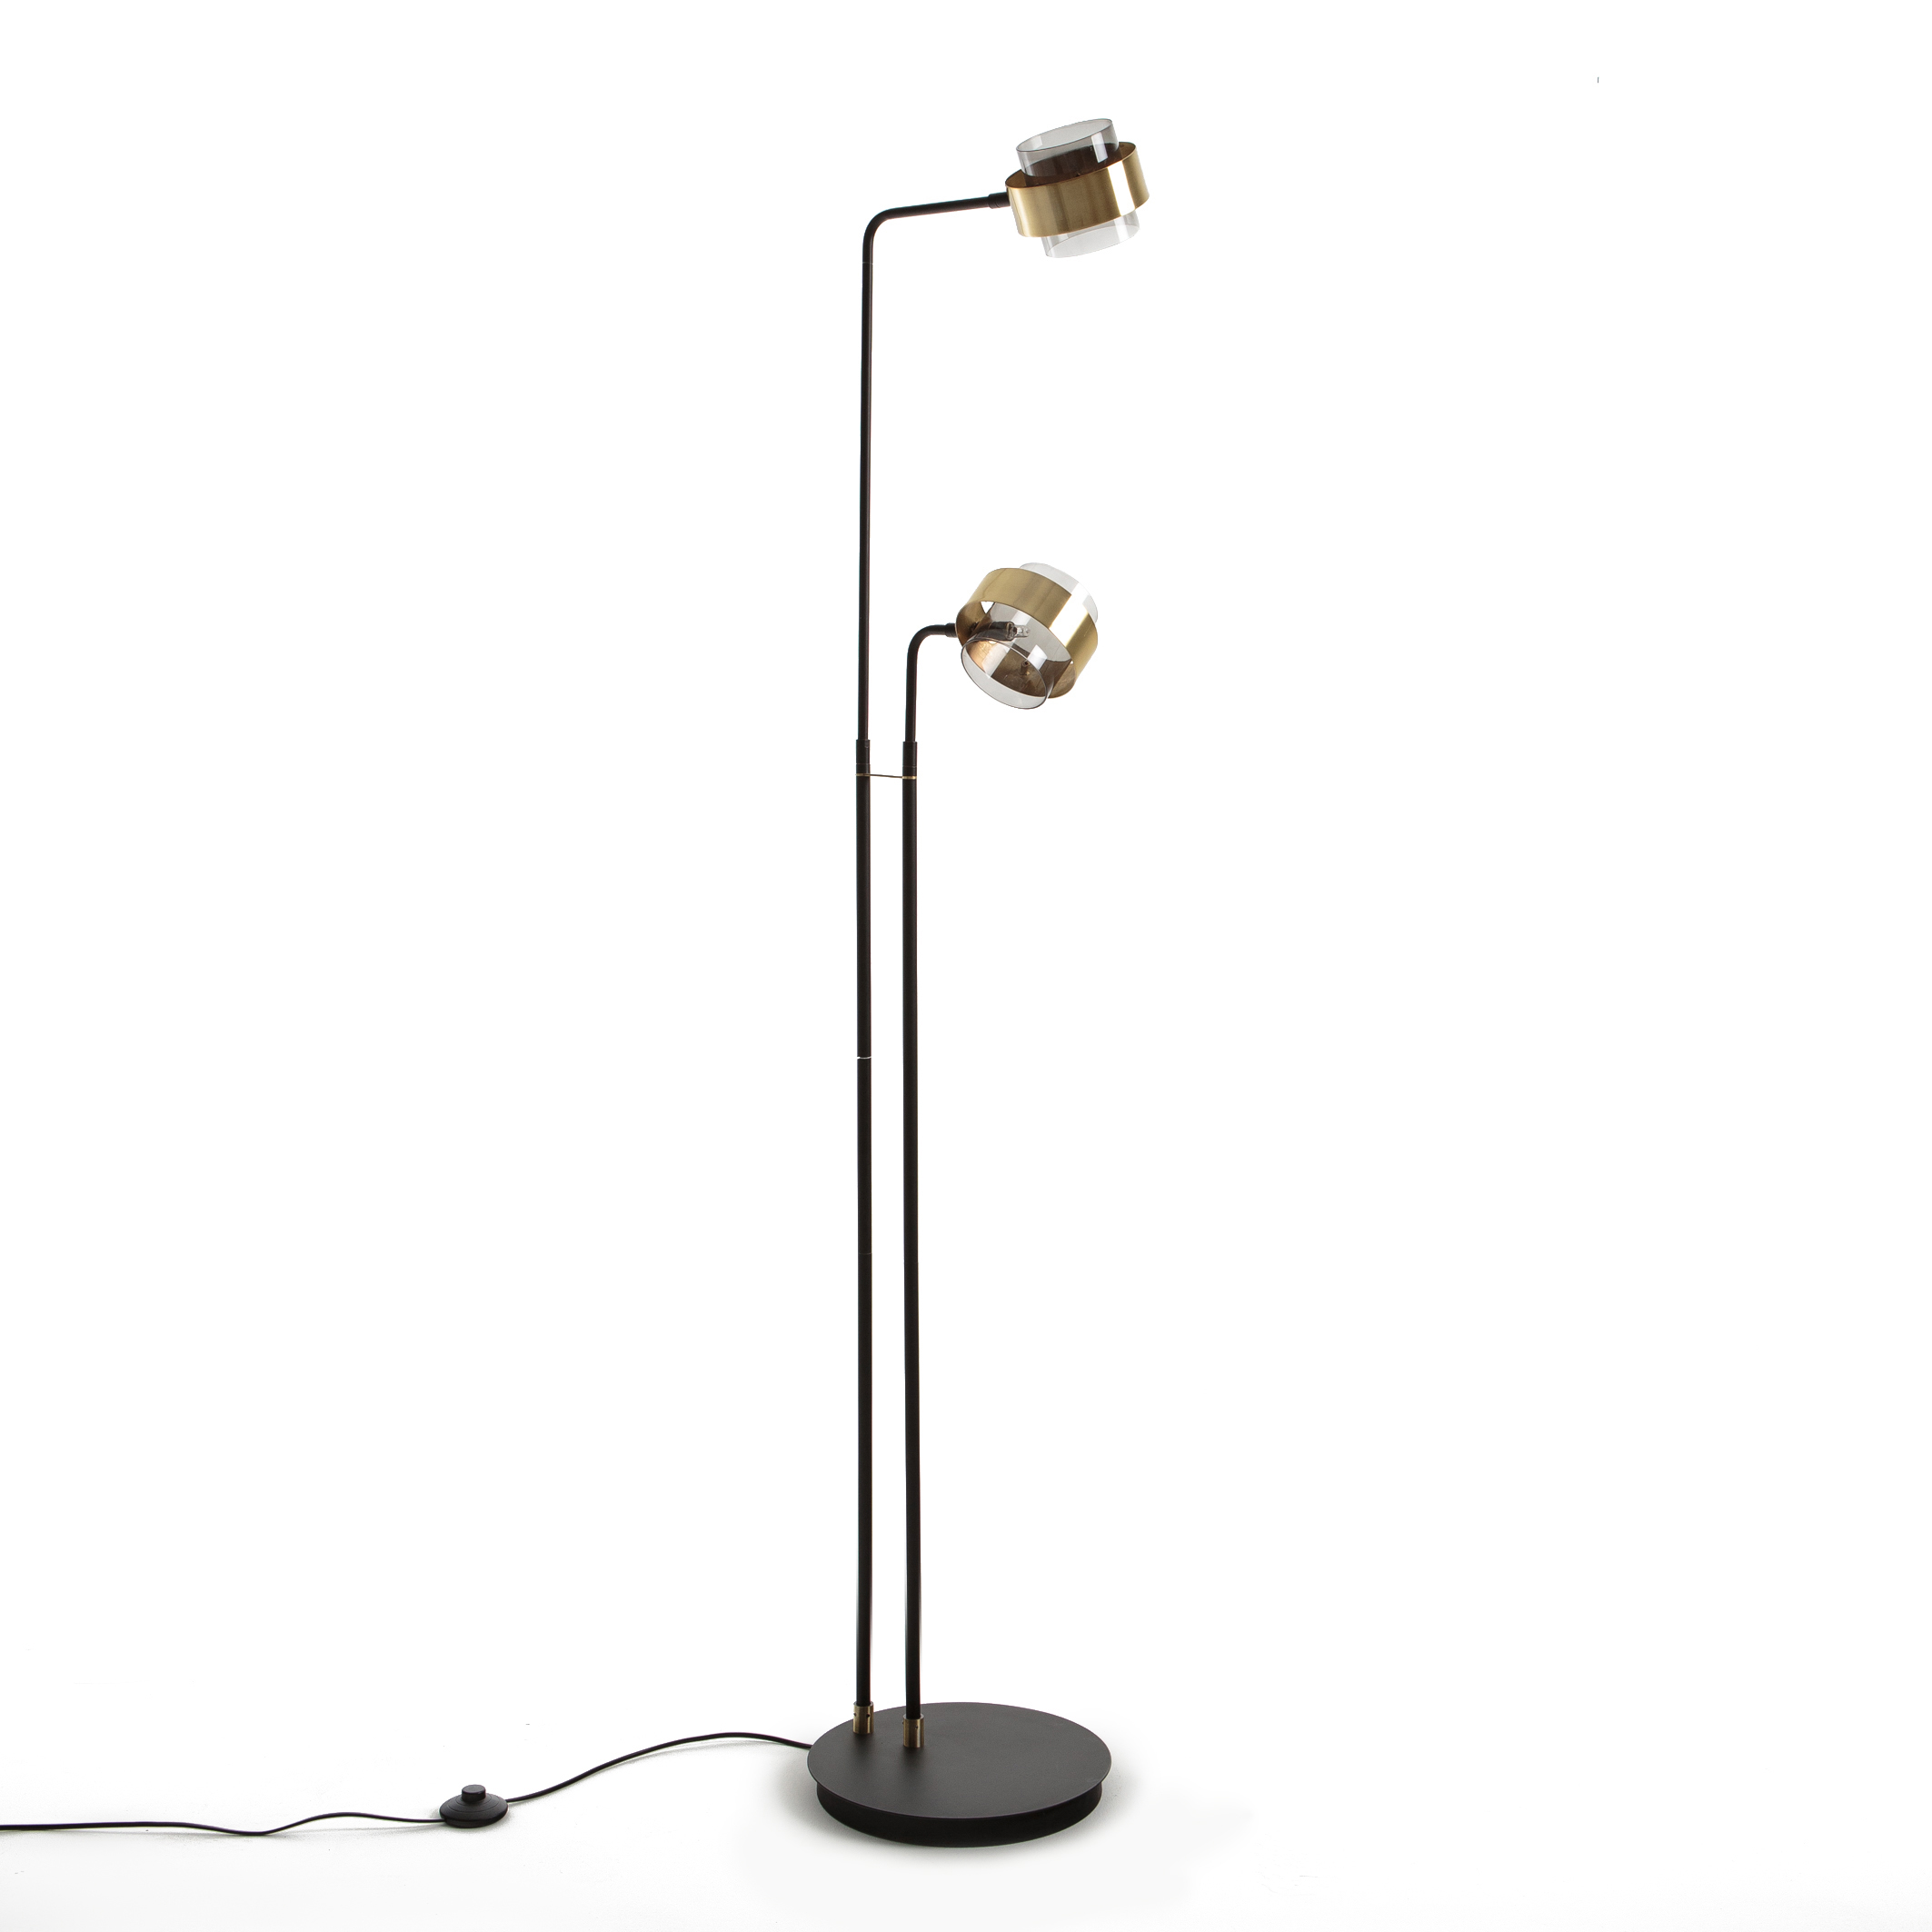 Botello metal La La glass adjustable & arms | Interieurs reading black/brass lamp Redoute floor Redoute with